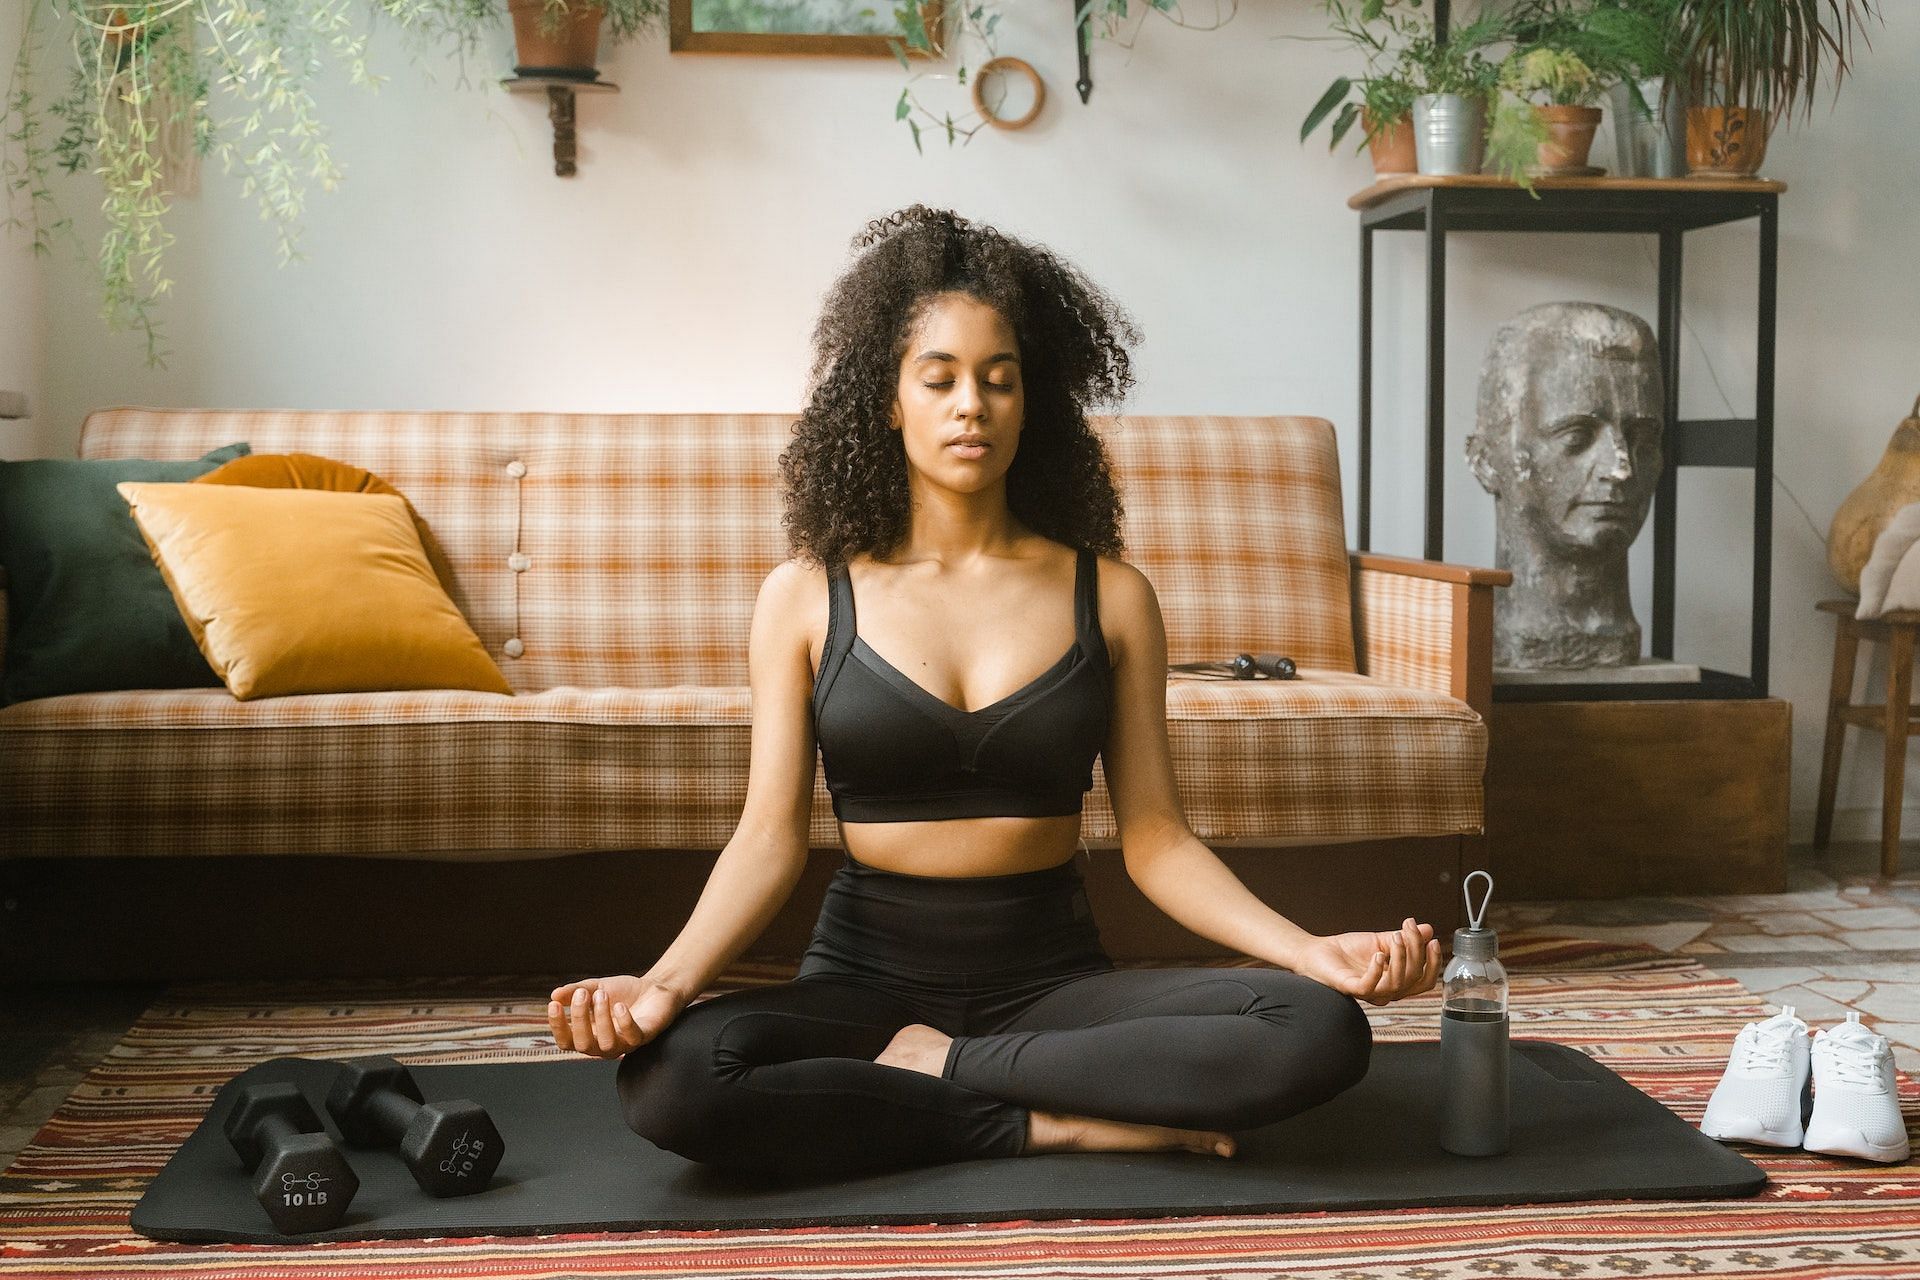 An evening yoga routine helps relax the mind. (Photo via Pexels/MART PRODUCTION)